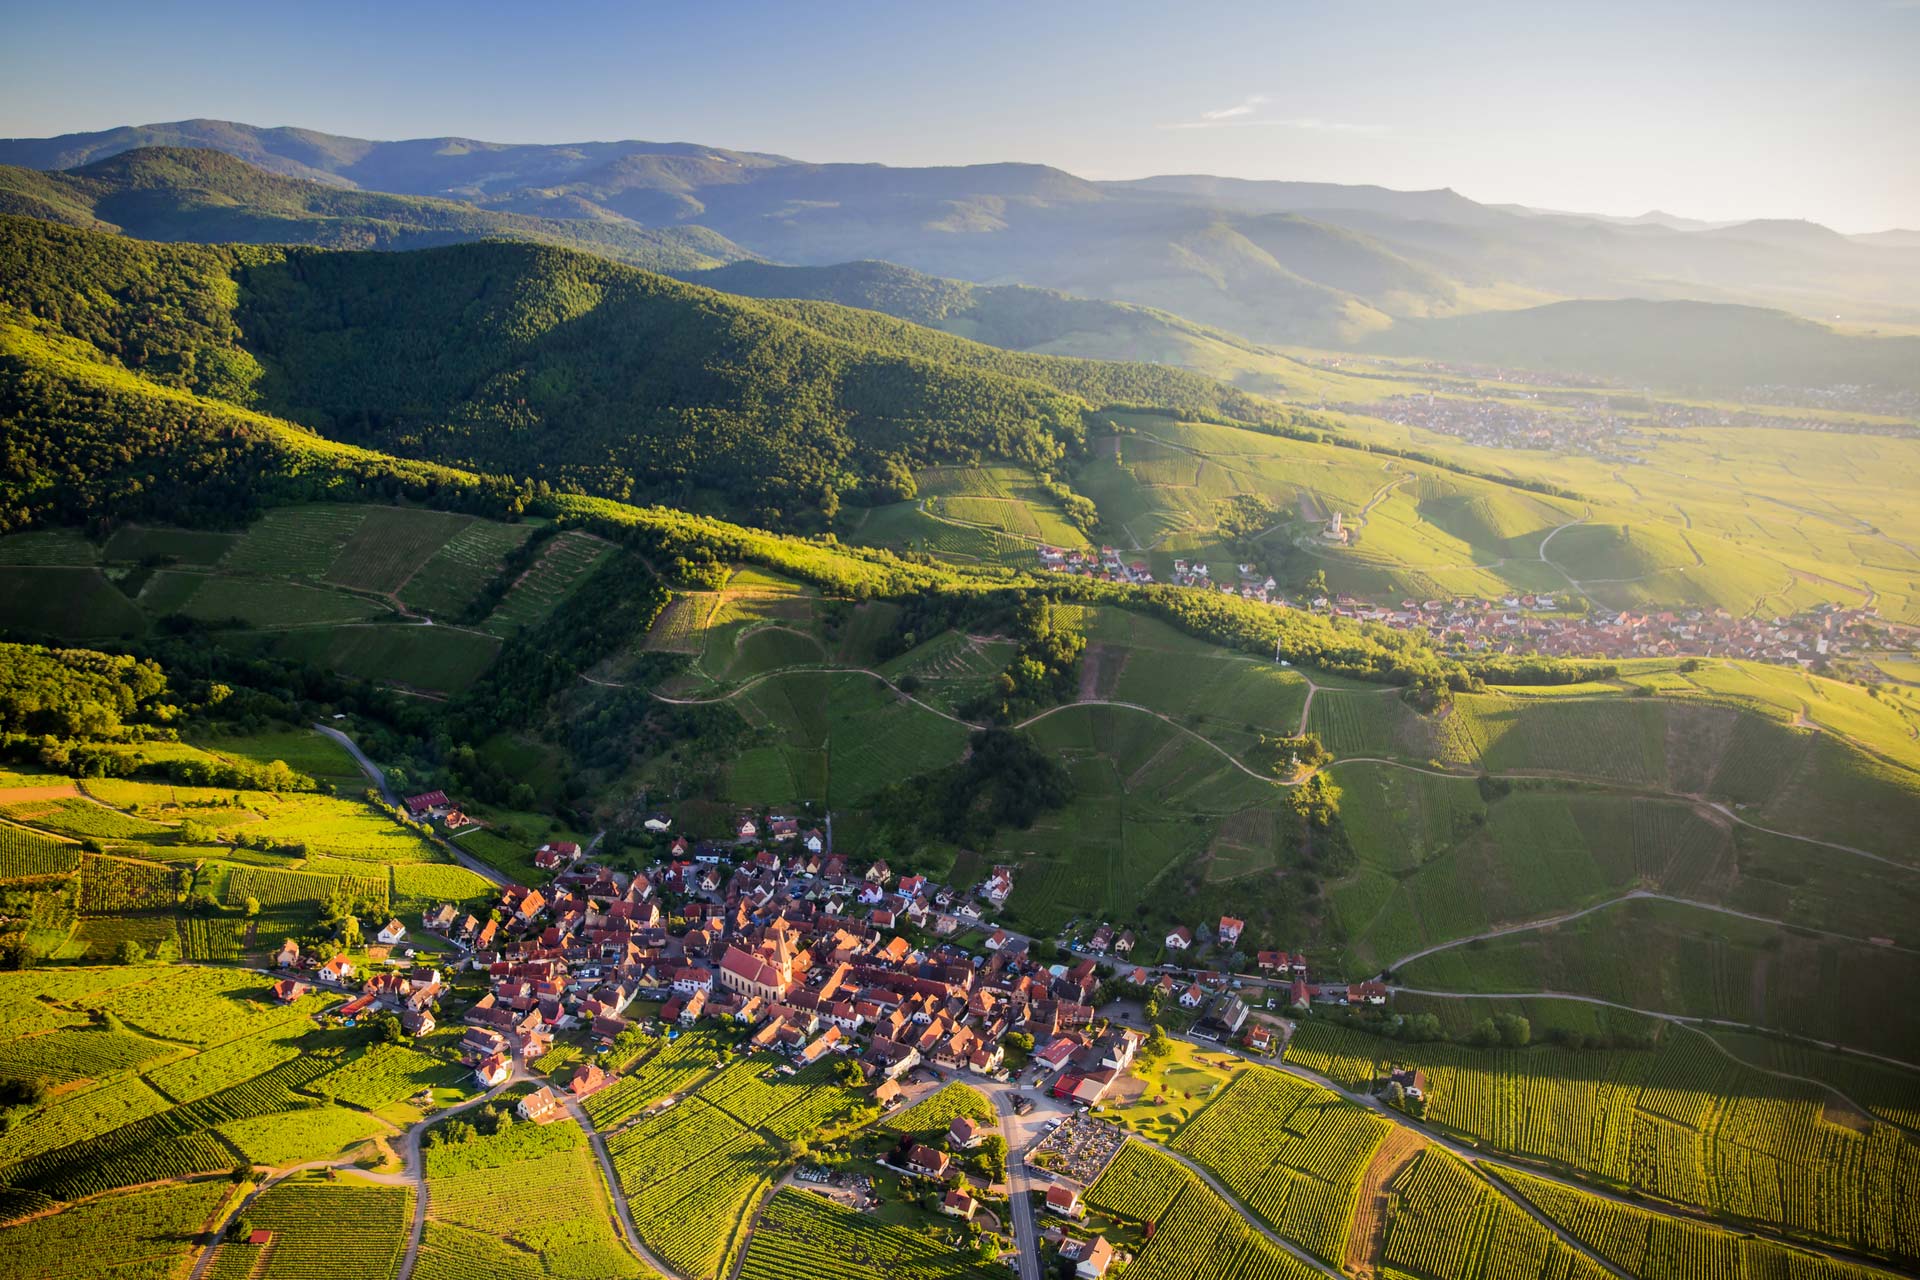 (c) Experience.alsace